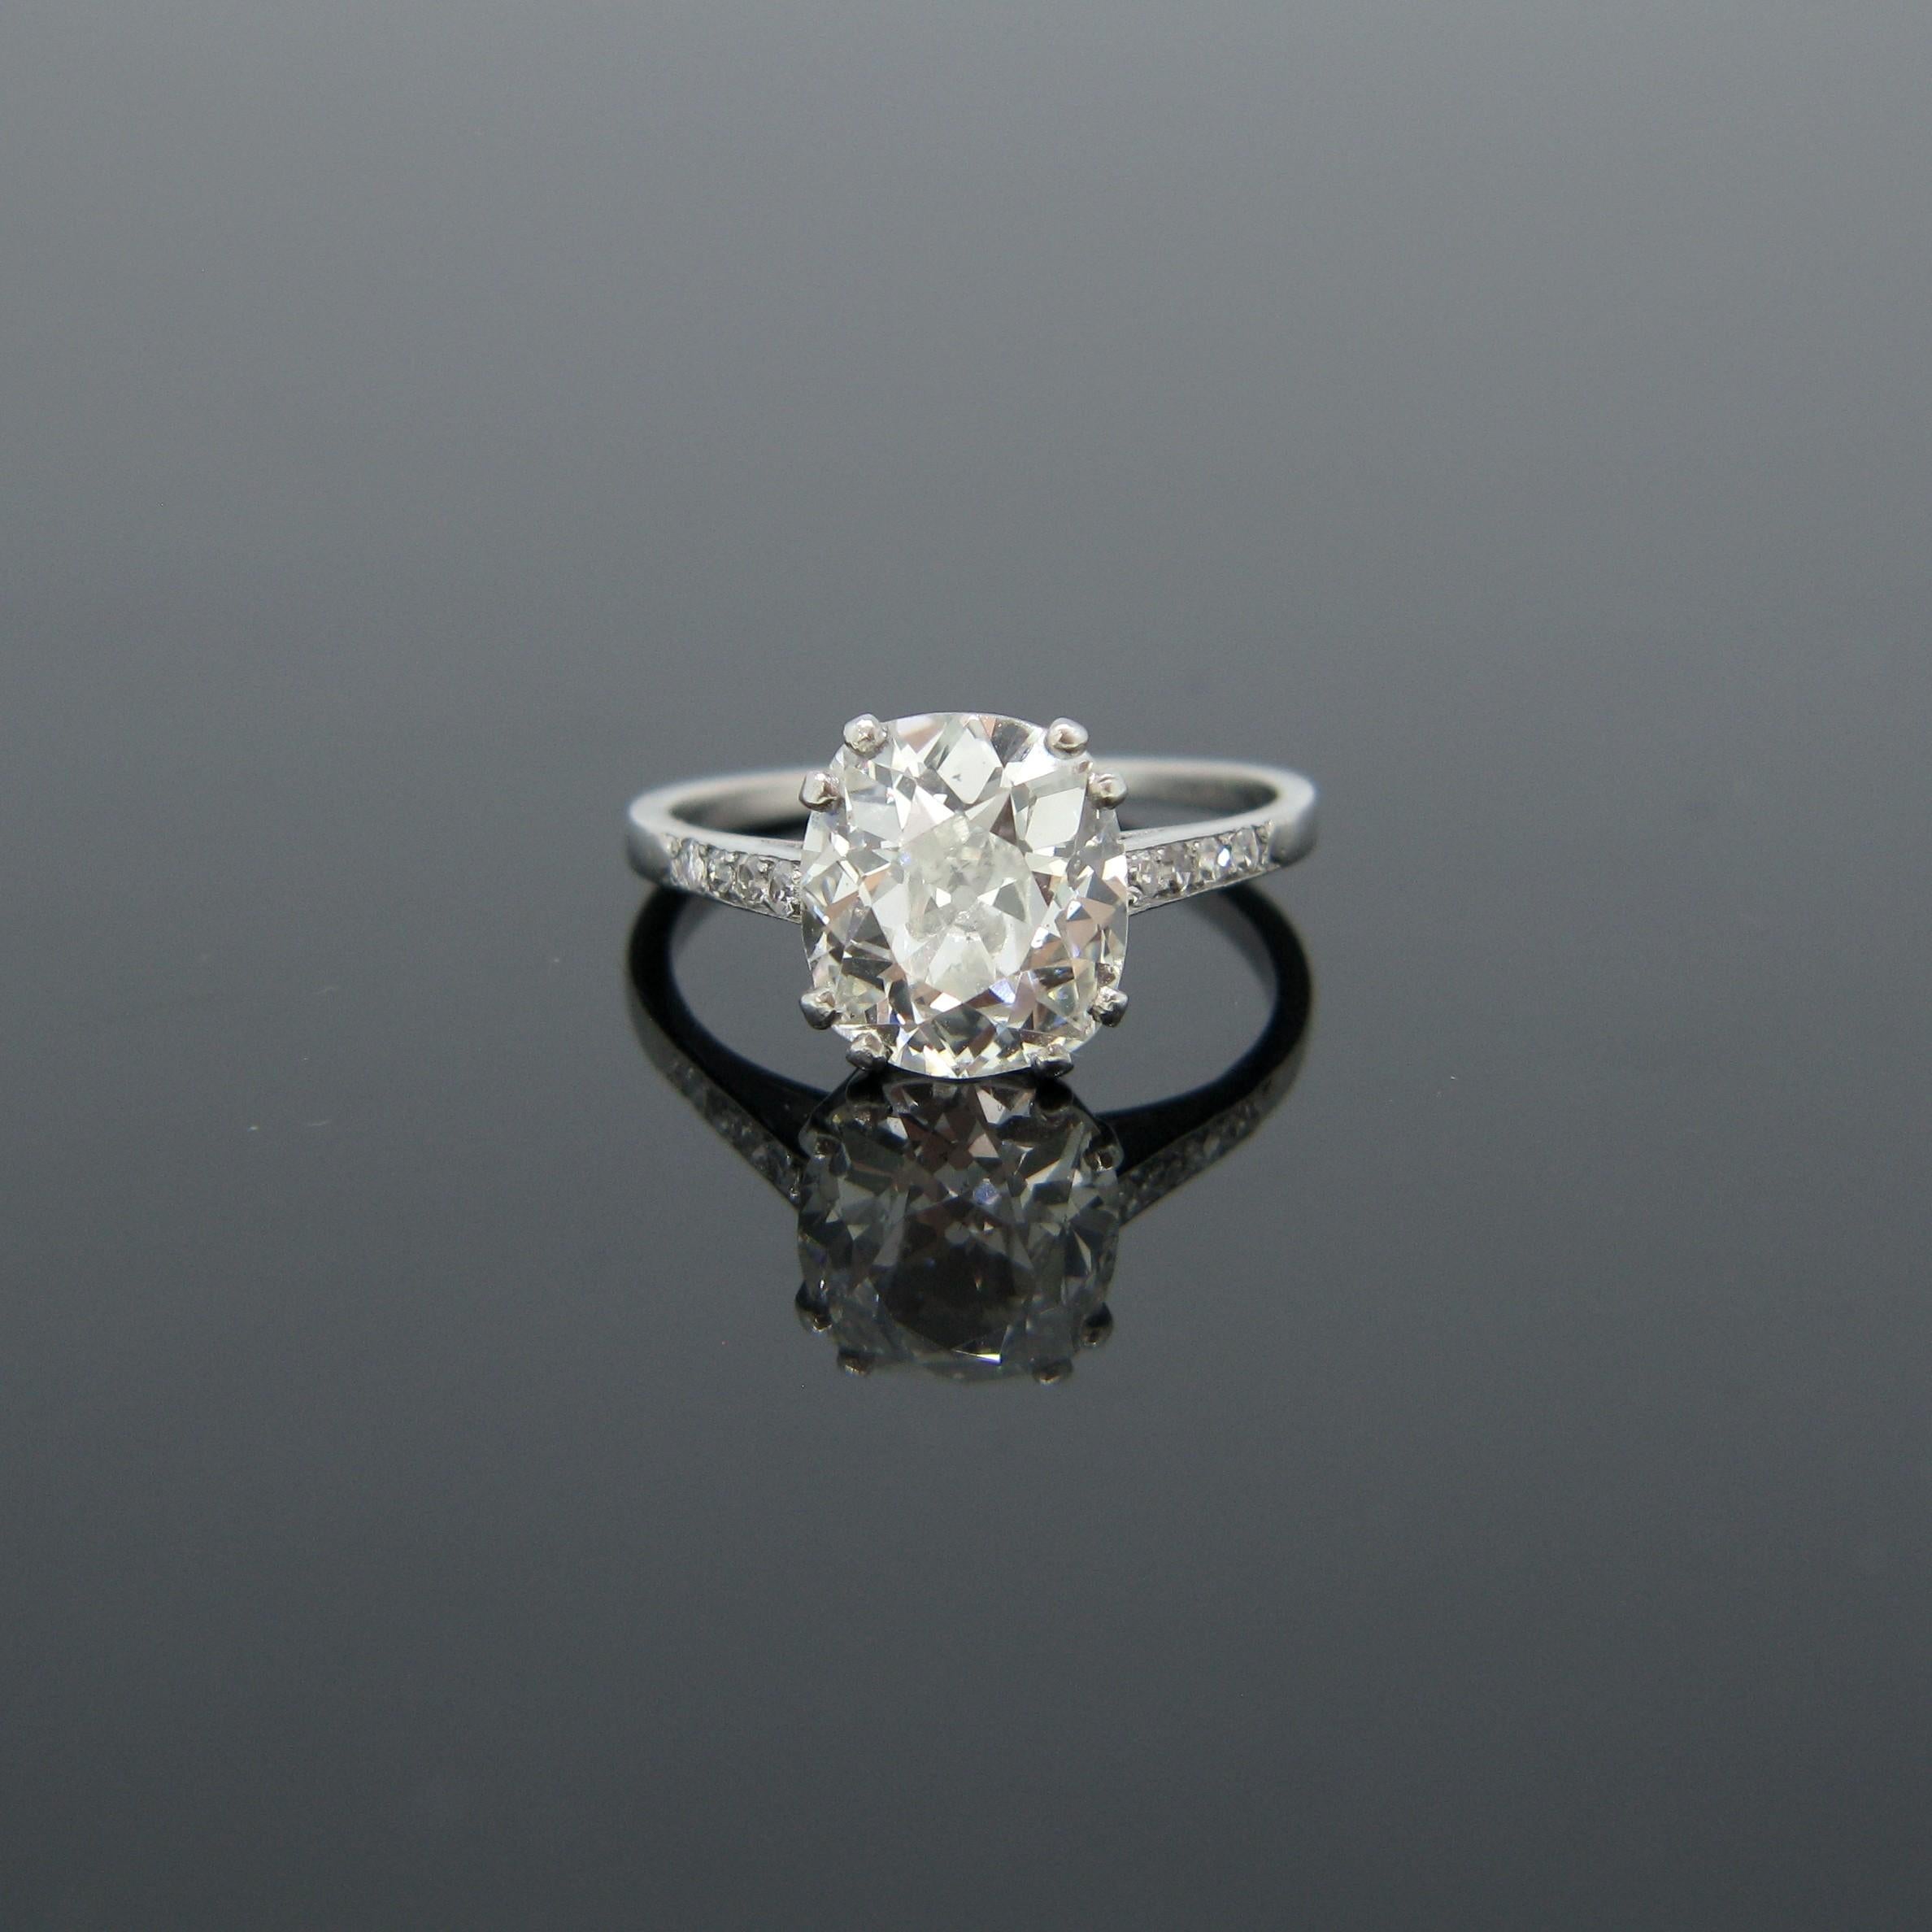 This stunning ring is from the Edwardian era and is fully made in platinum (tested). The diamond is a beautiful old cut cushion diamond shouldered with four single cut diamonds on each side. The diamond weighs 2.97ct, colour I and clarity SI2 – it